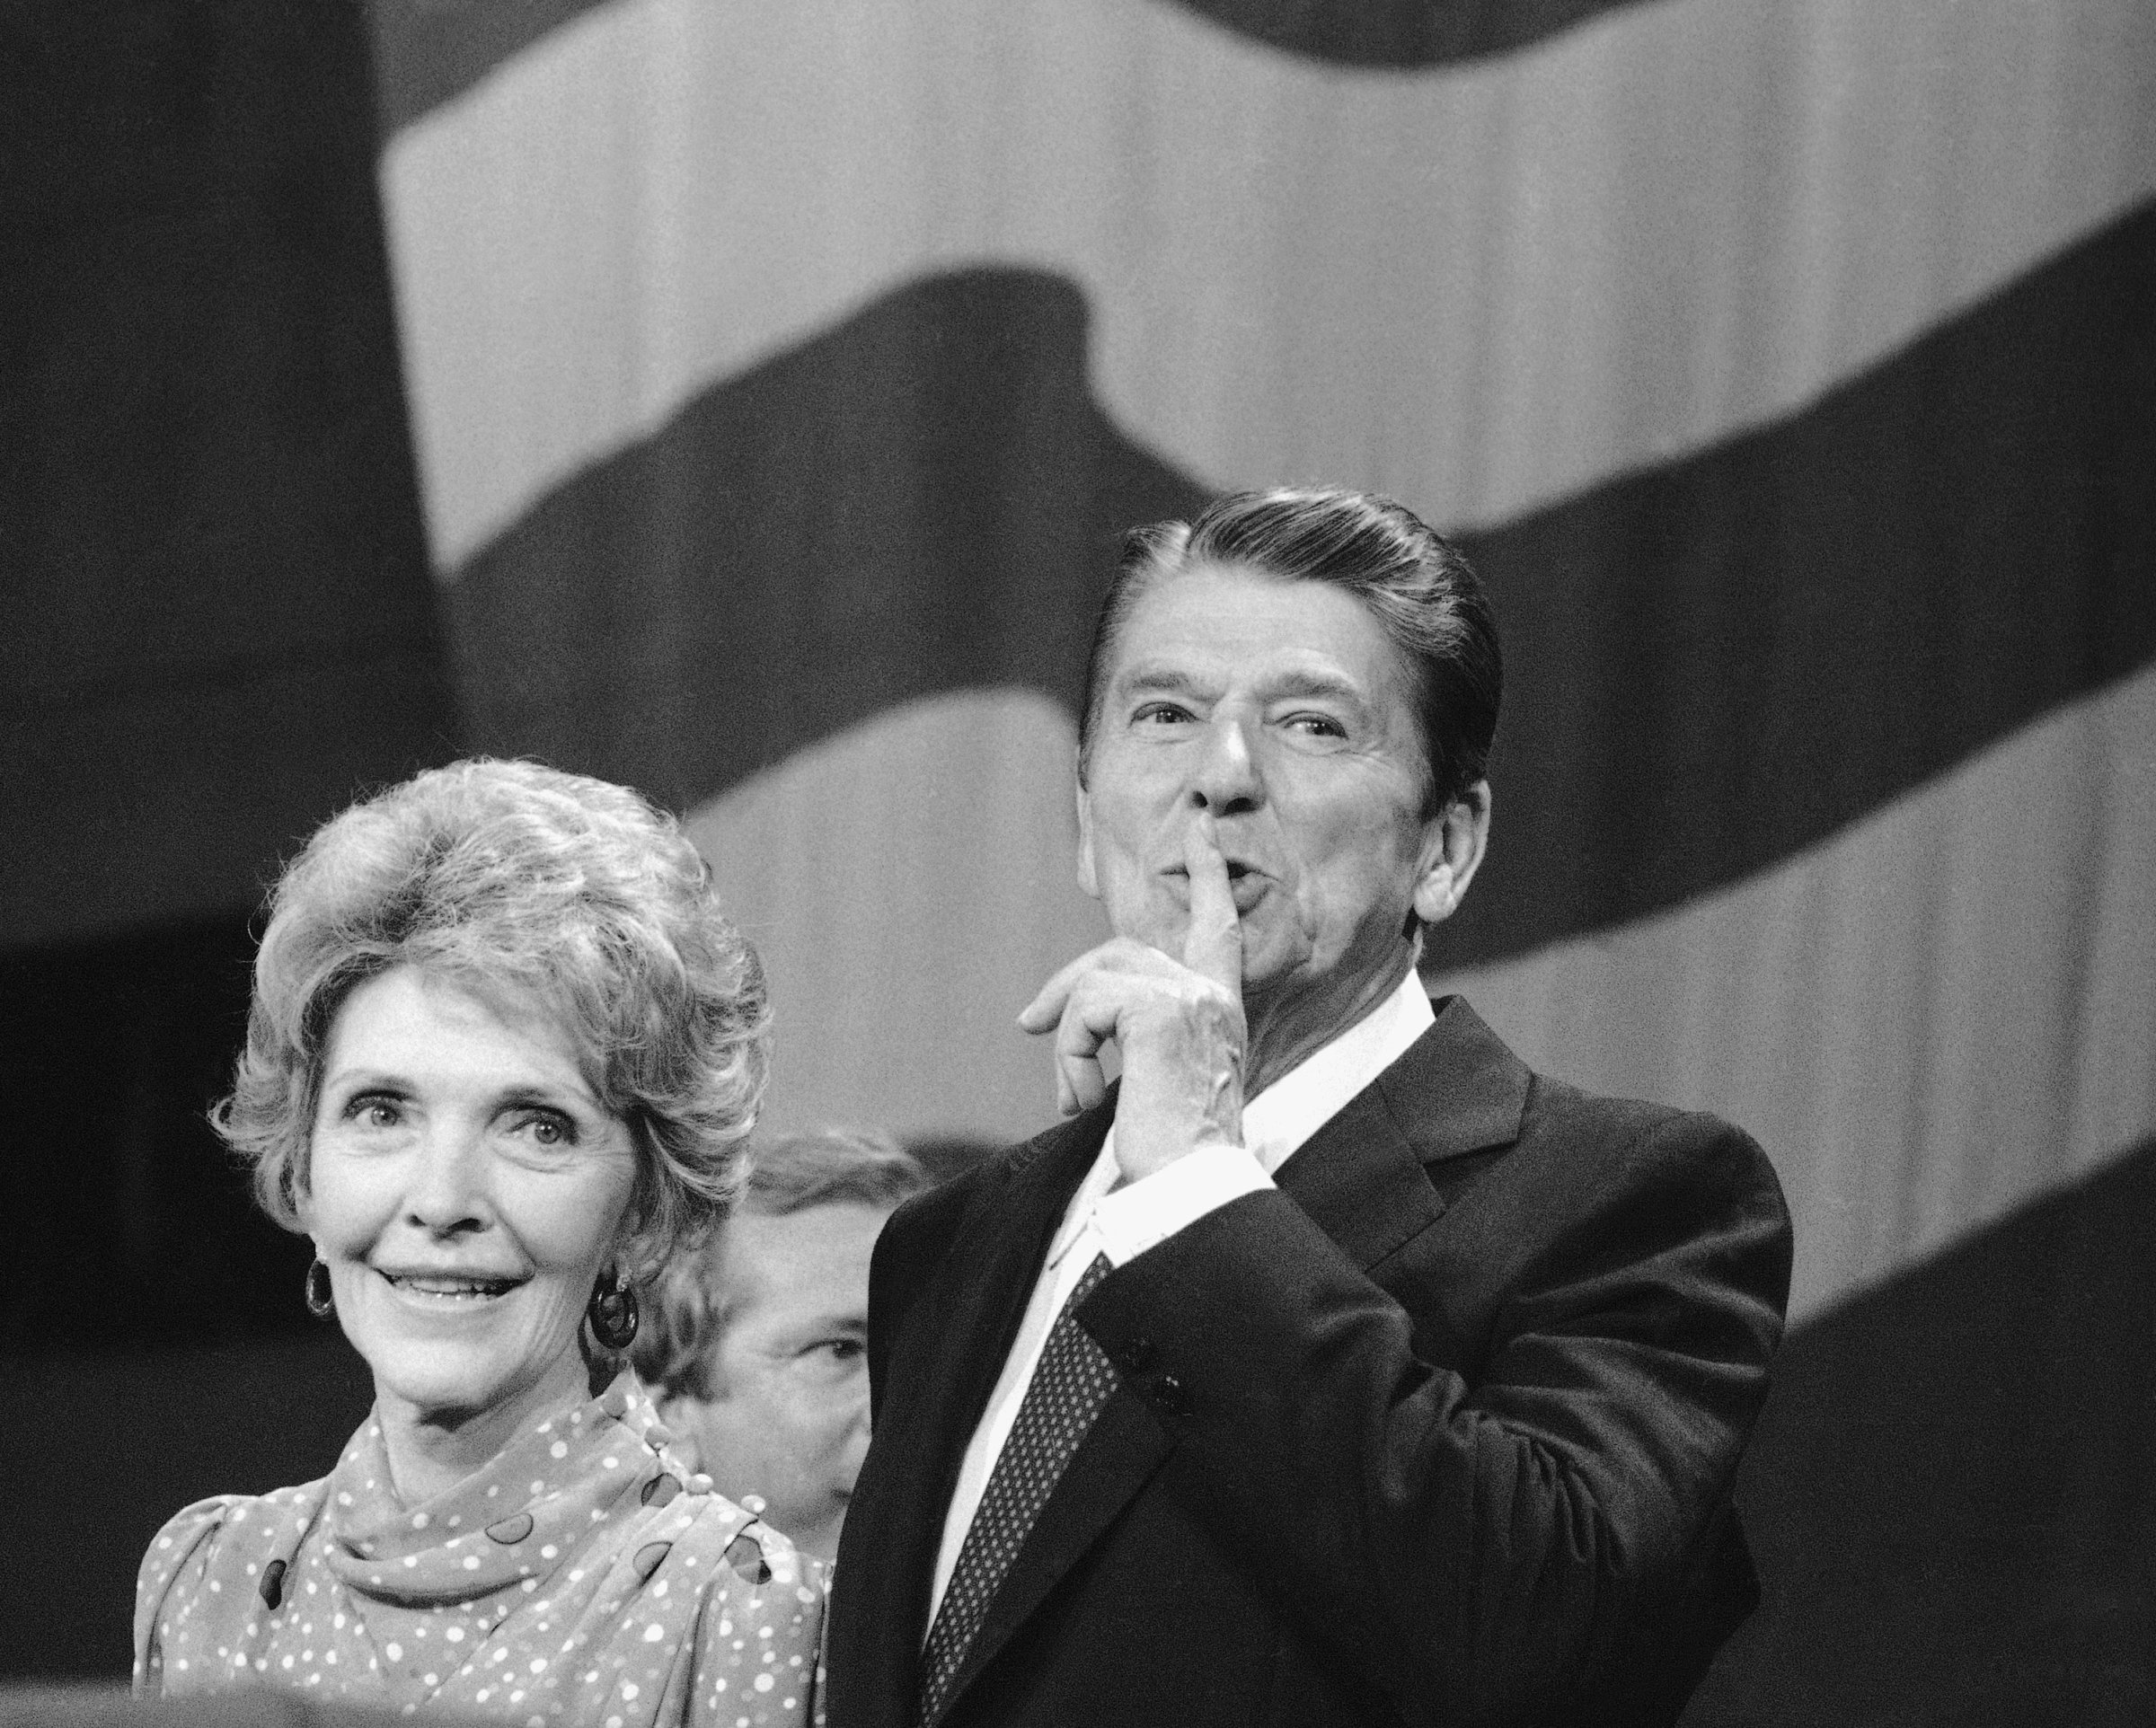 President Ronald Reagan and First Lady Nancy Reagan at the 33rd Republican National Convention in Dallas, Aug. 24, 1984.